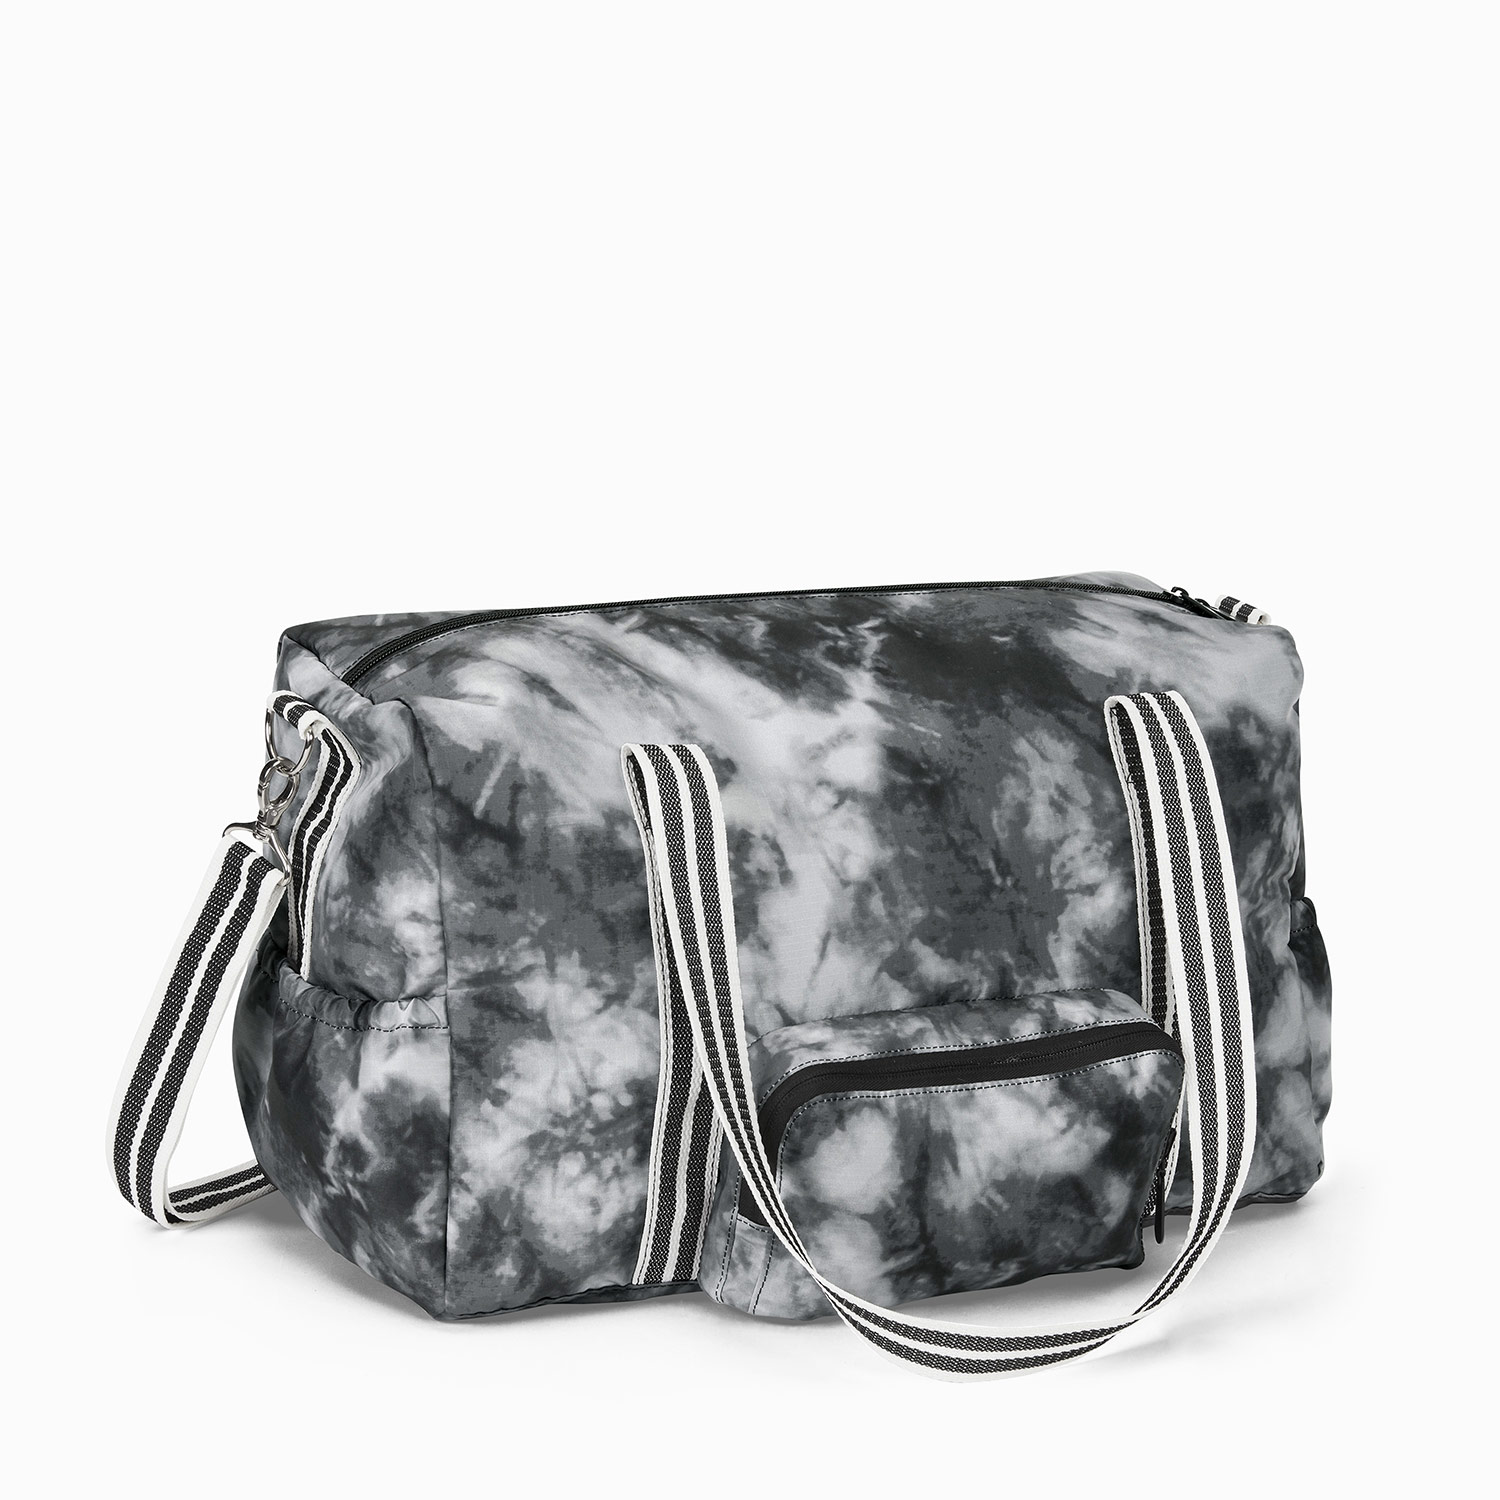 Mulberry Tie-Dye - Packaway Duffle - Thirty-One Gifts - Affordable Purses,  Totes & Bags